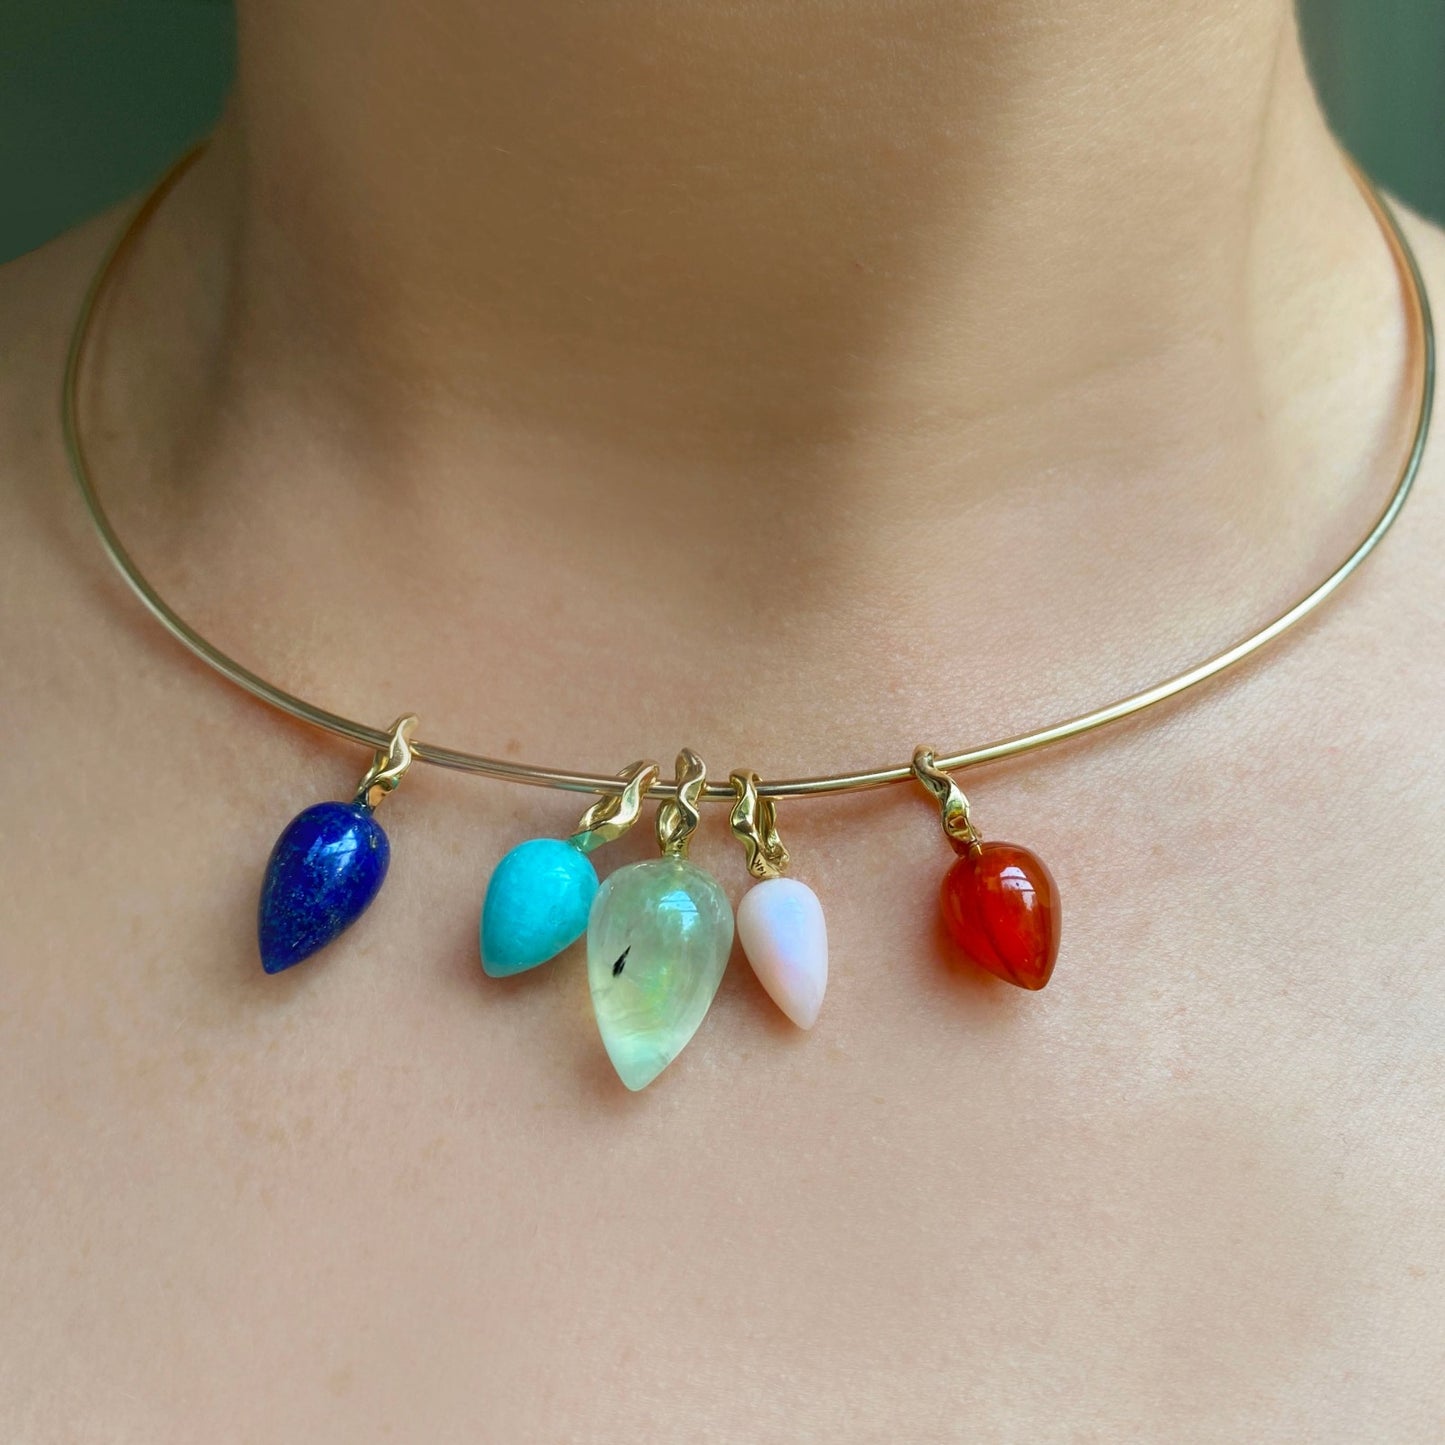 5 acorn drop charms styled on a neck hanging from a wire choker necklace.